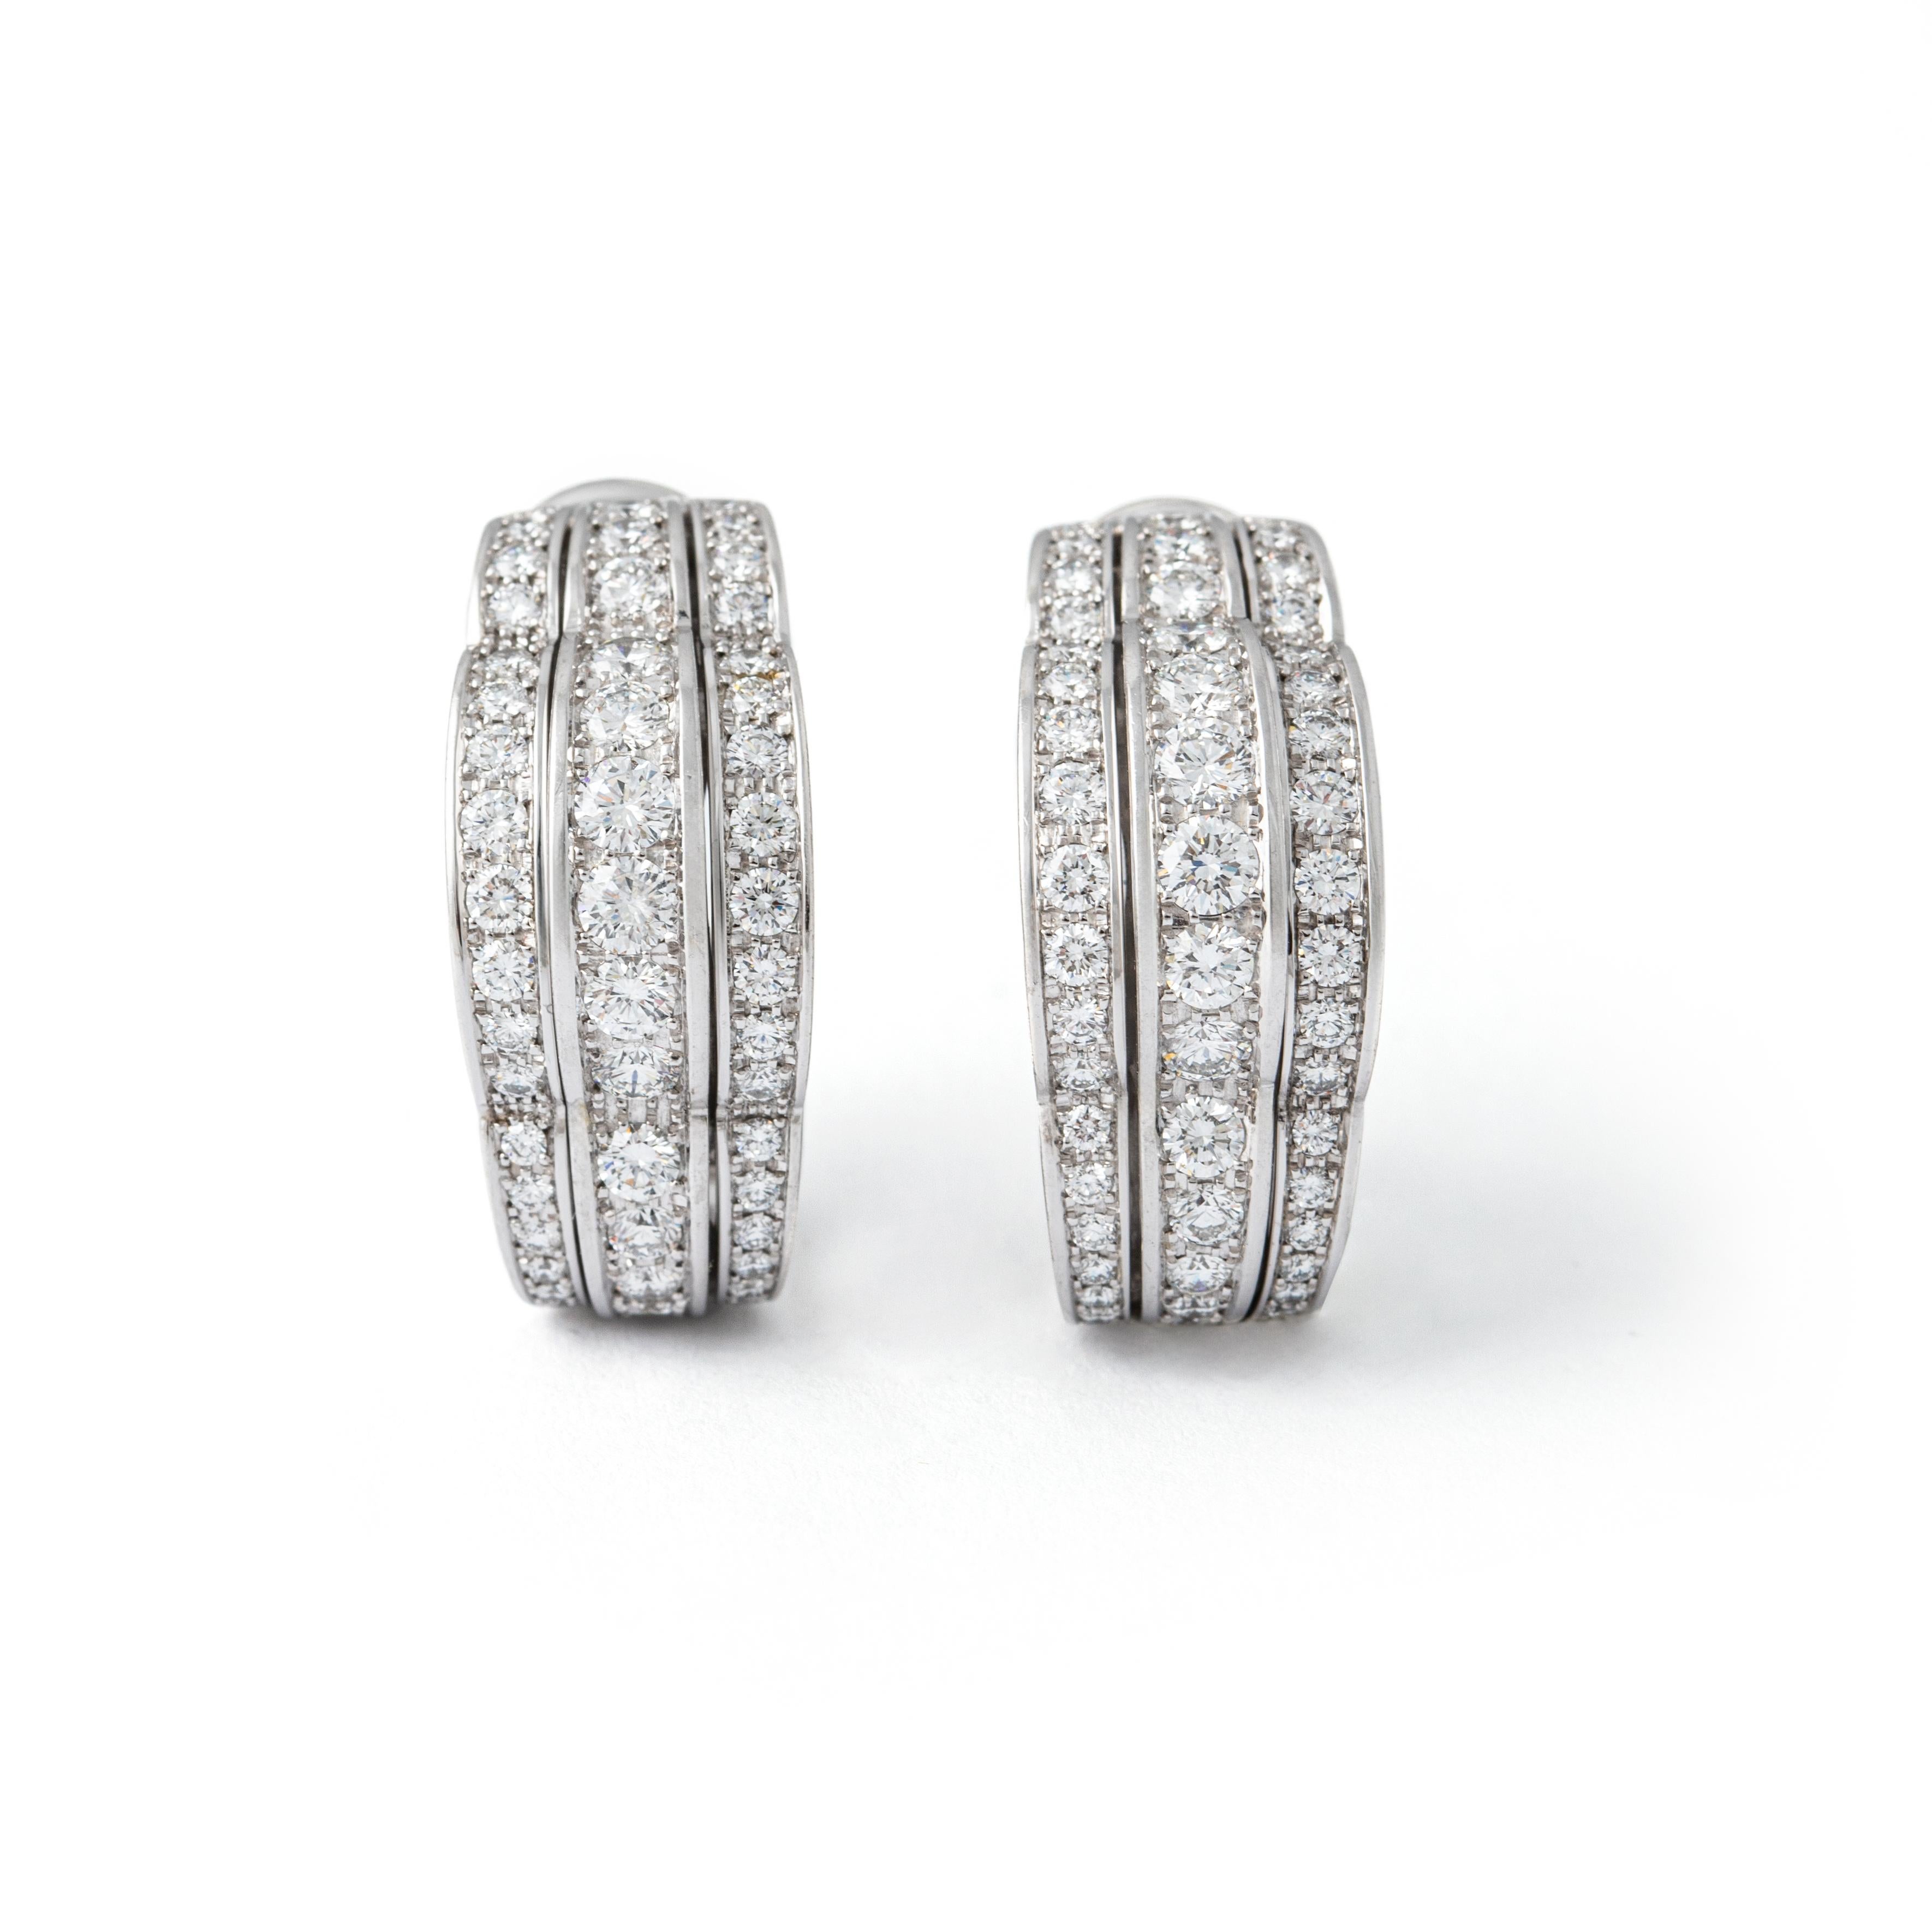 Chopard Diamond White Gold 18K Earrings.

Earrings: 108 diamonds, 2.26 carats total weight.
Total height: approx. 2.30 centimeters.
Total width: approx. 0.80 centimeters up to 1.10 centimeters.
Total weight earrings: 23.67 grams.
Retail value